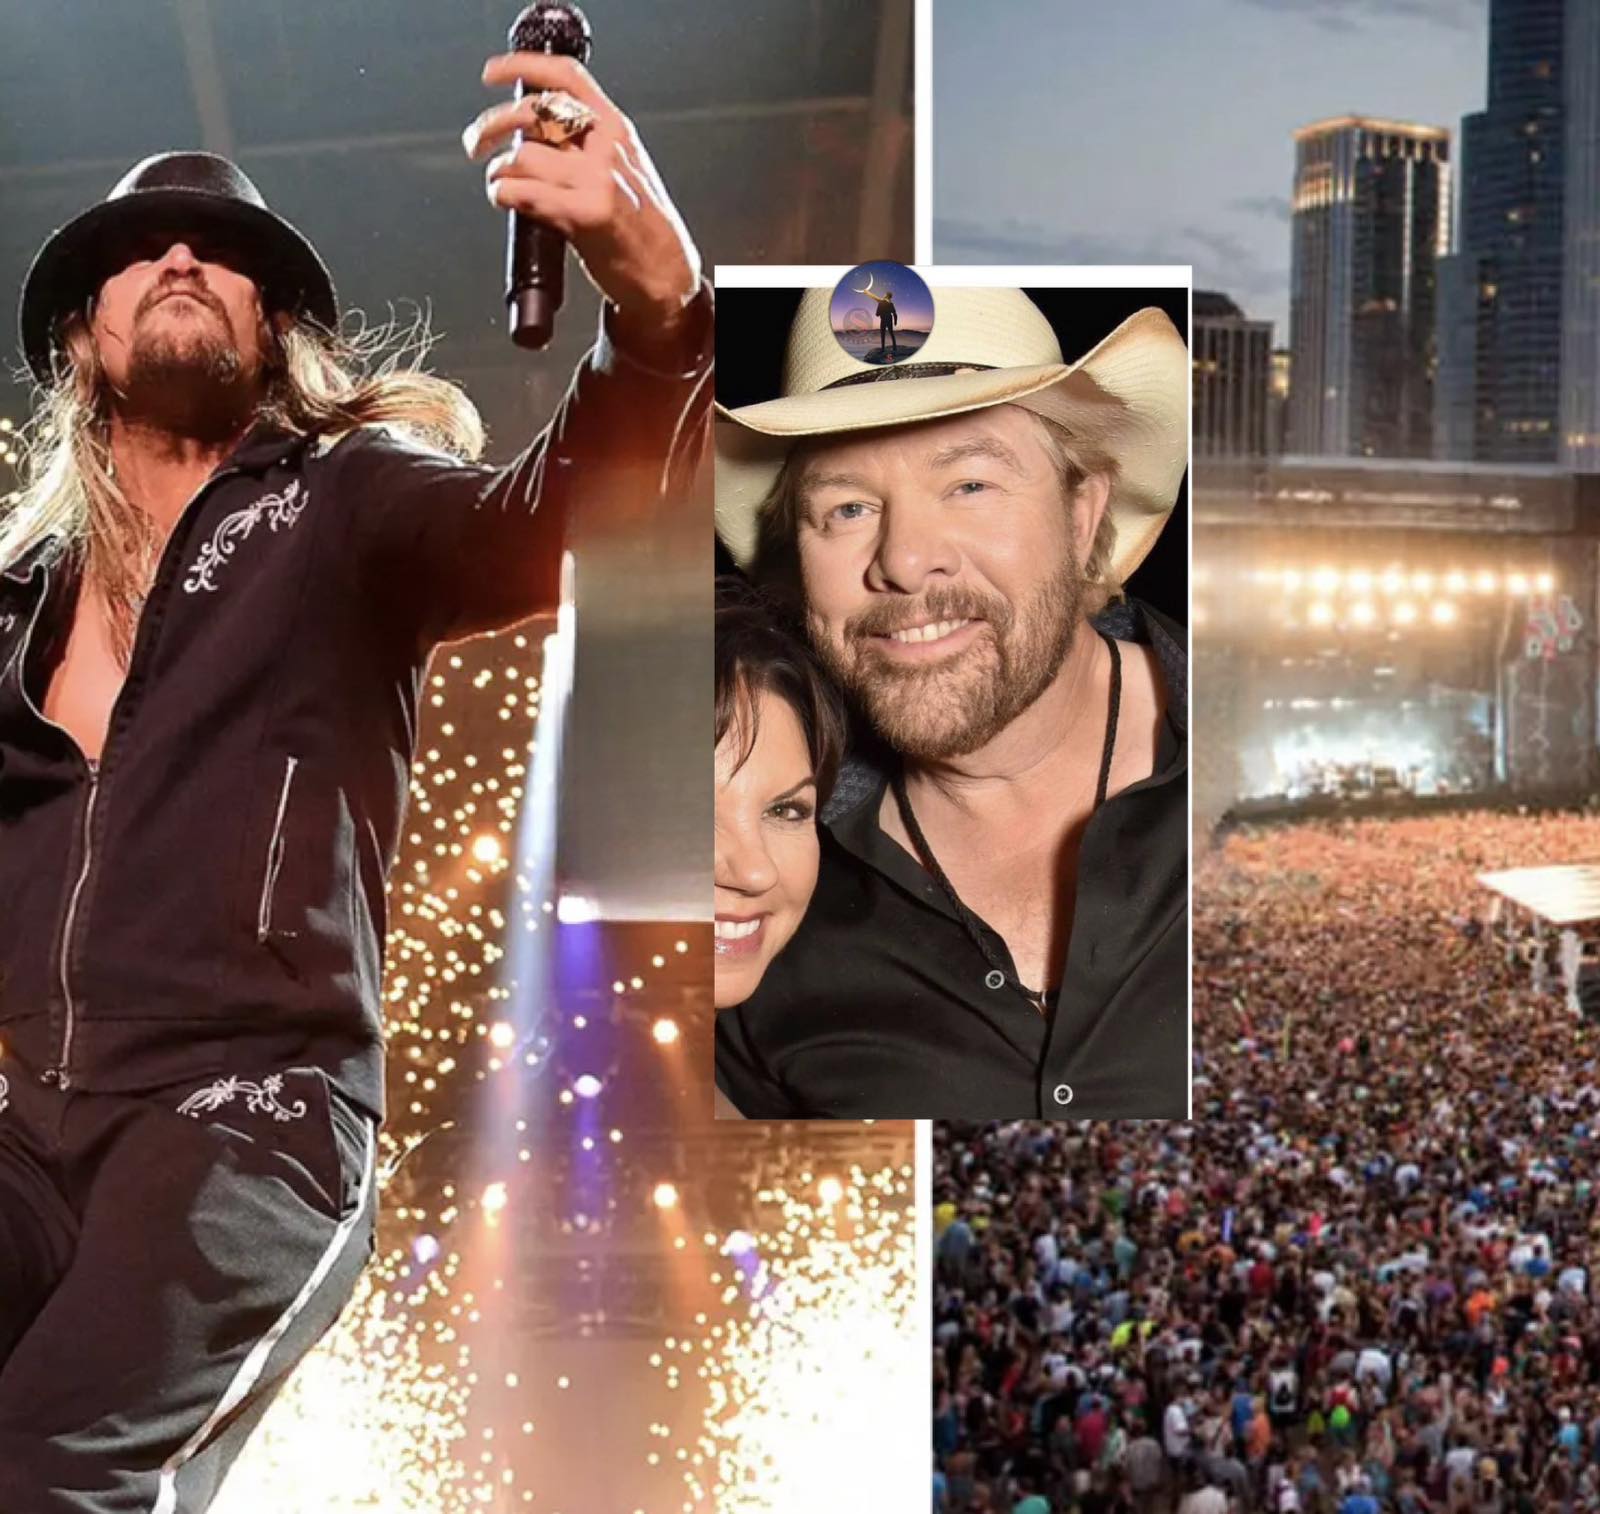 “Kid Rock’s tribute to Toby Keith establishes a new record, attracting a larger crowd than Taylor Swift’s most significant performance.”